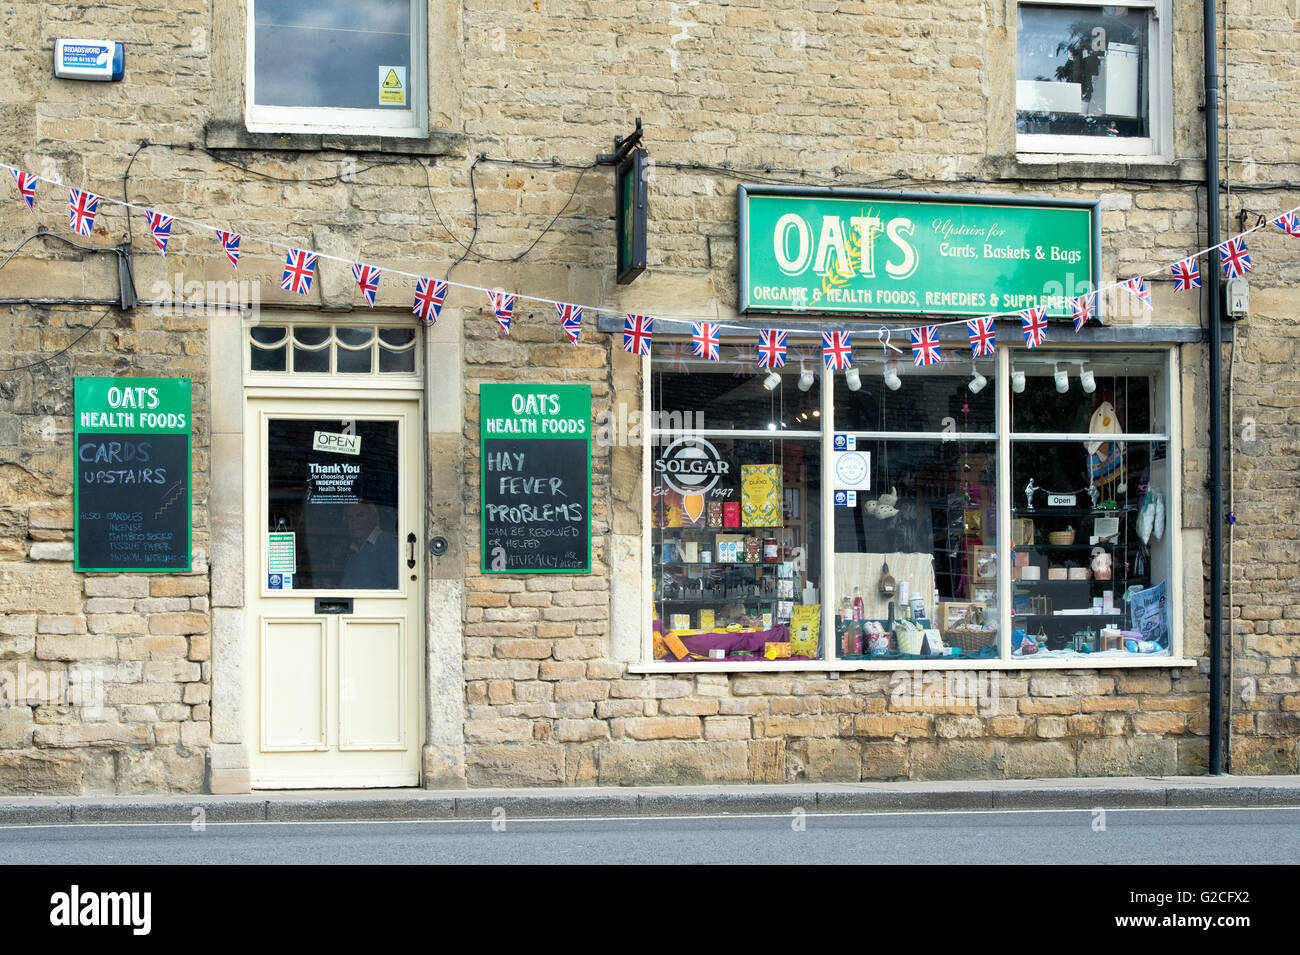 Oats health food shop in Chipping Norton. Cotswolds, Oxfordshire, England Stock Photo